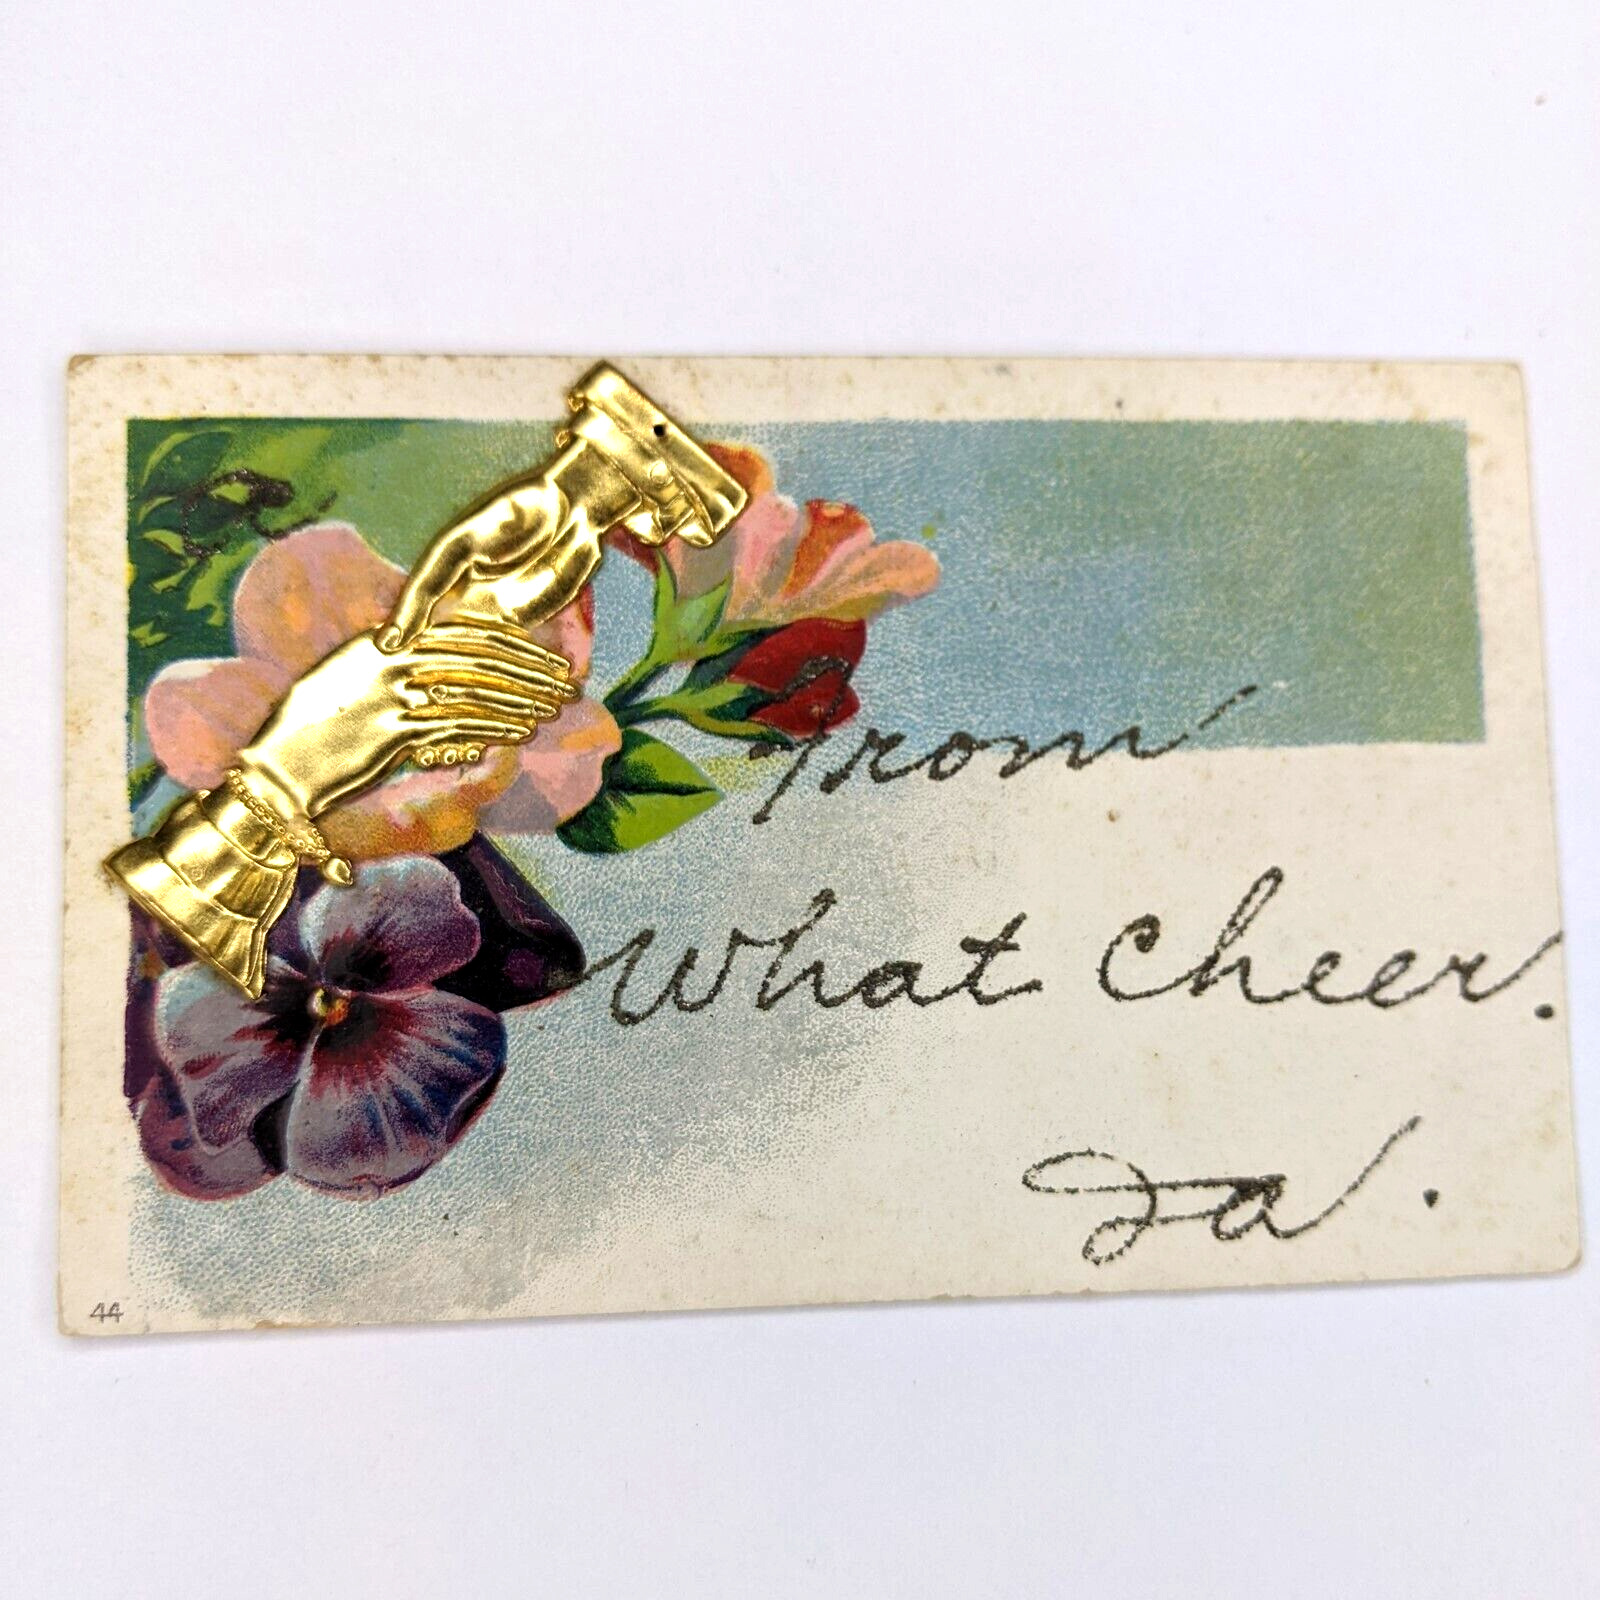 c1910s What Cheer, IA Metal Embossed Gold Hands Novelty Handmade Postcard A175